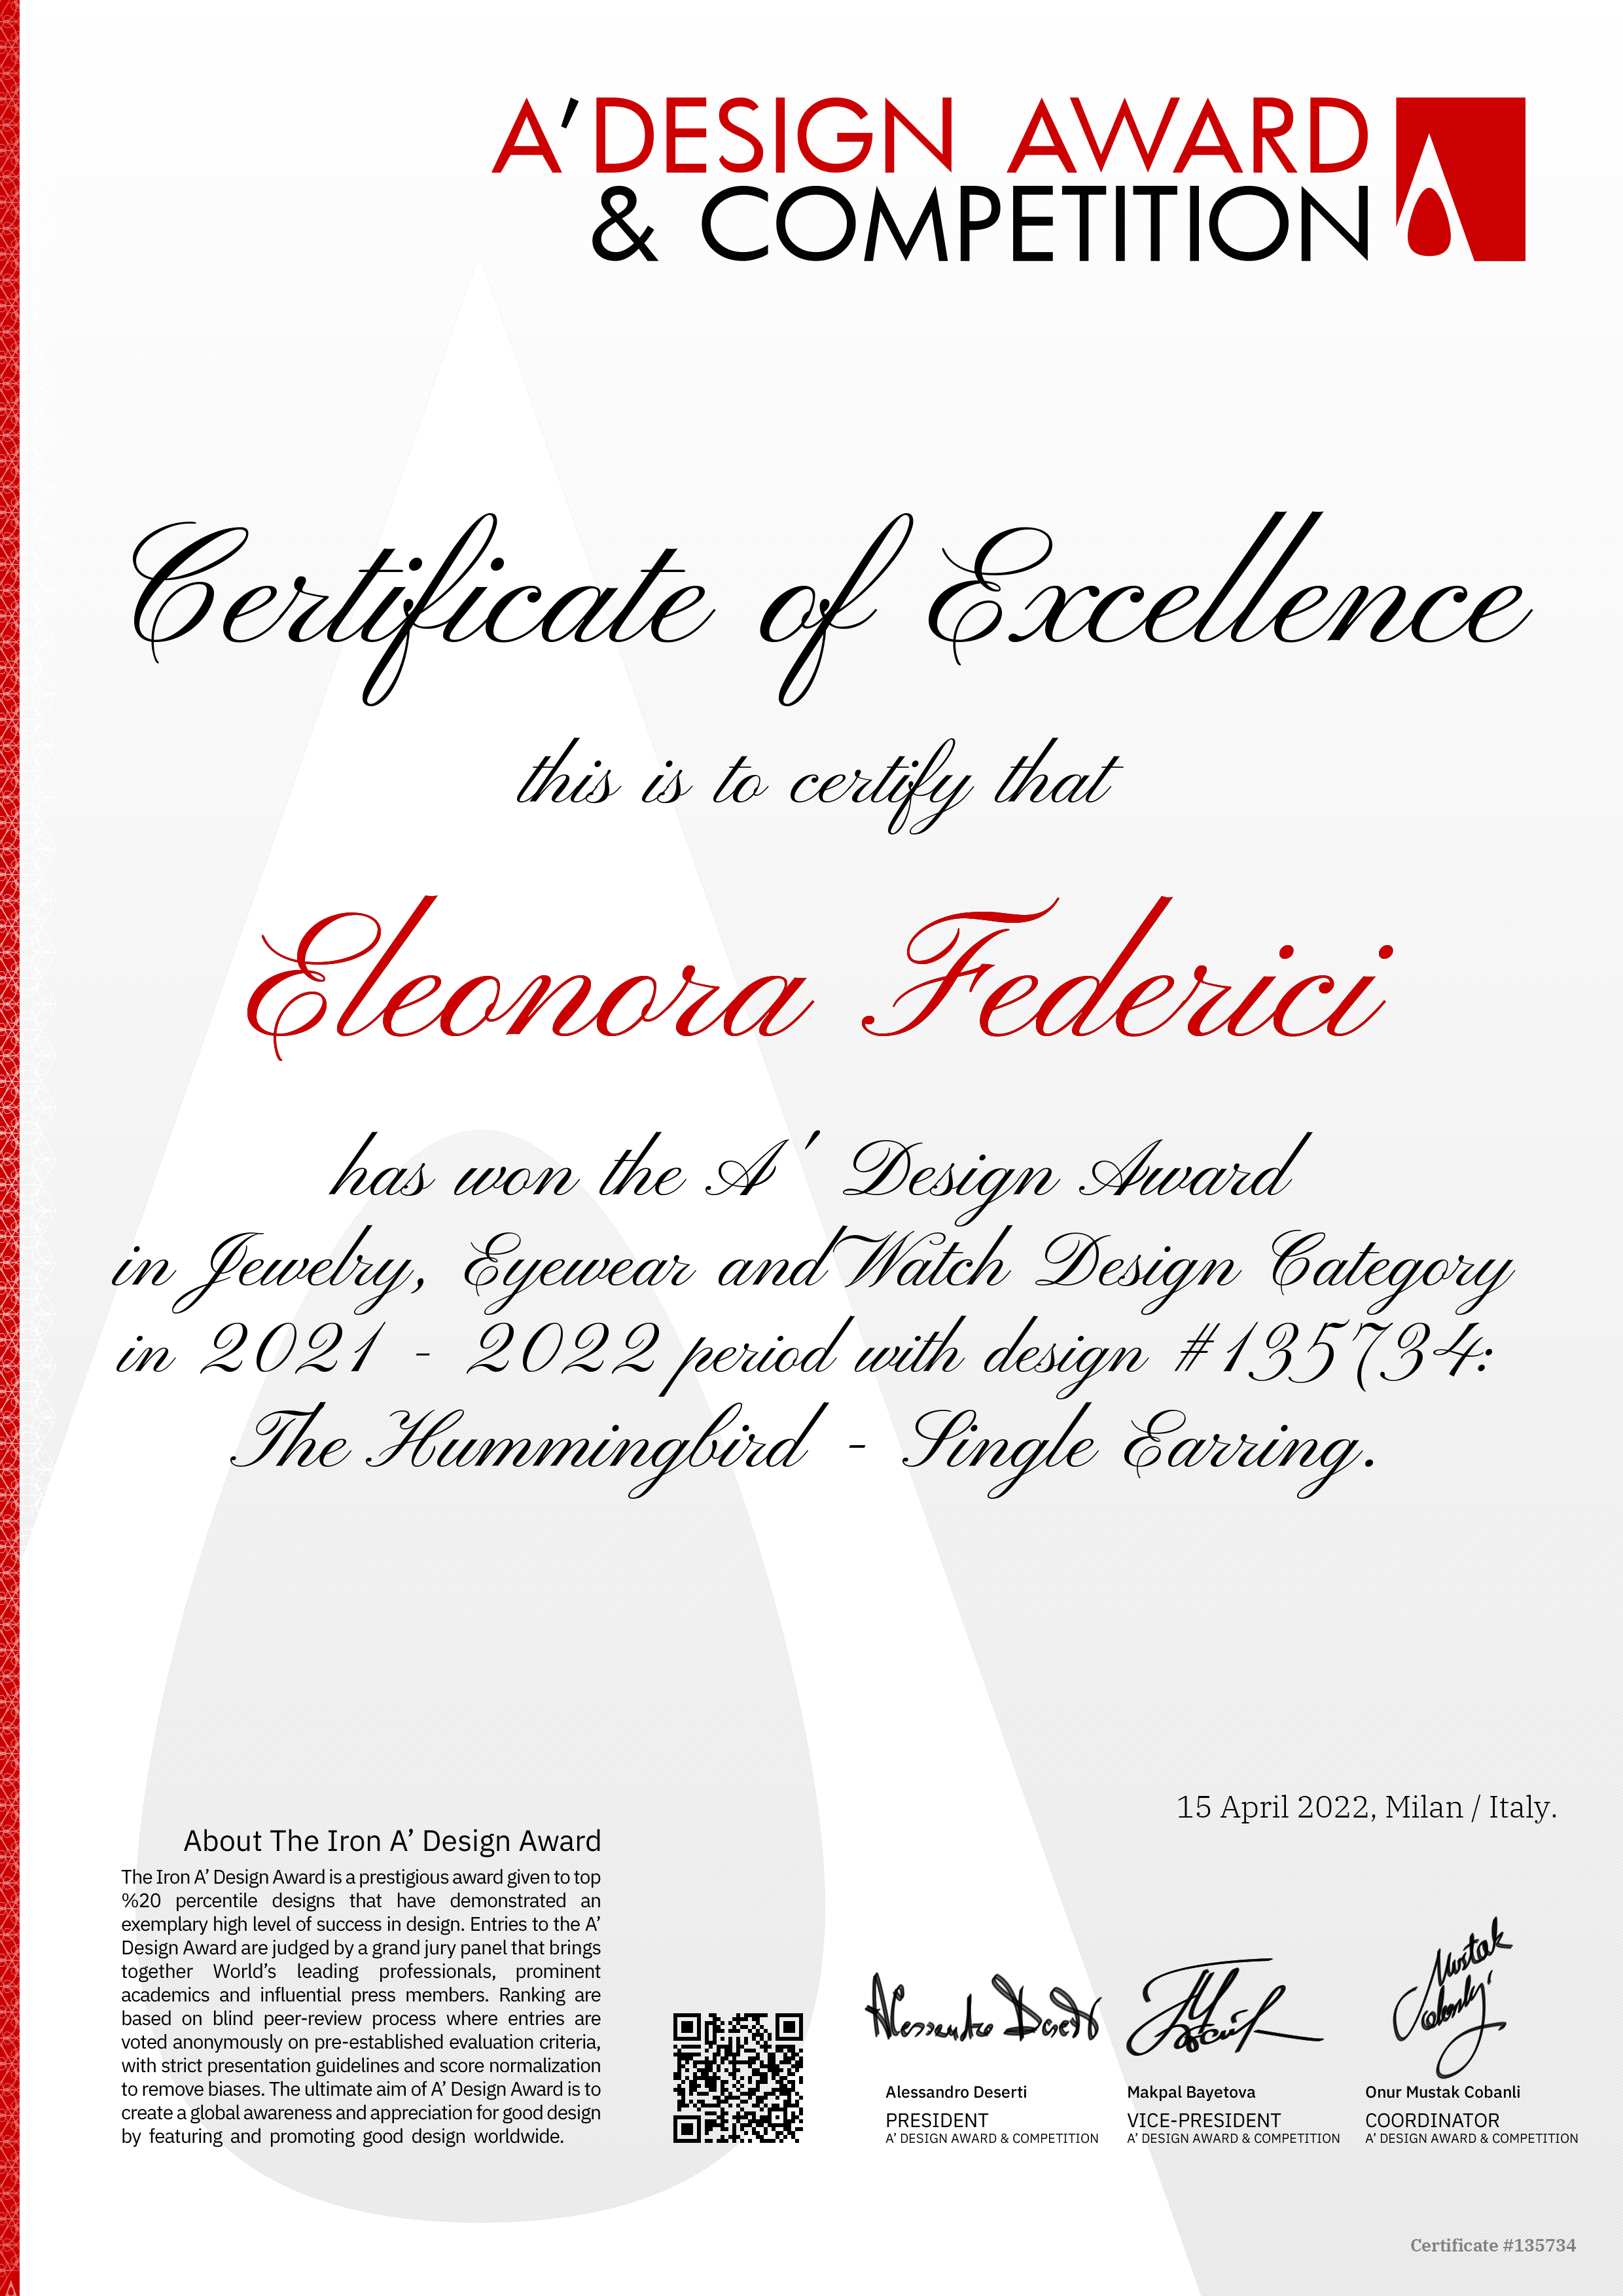 A Design Award & Competition Certificate of Excellence